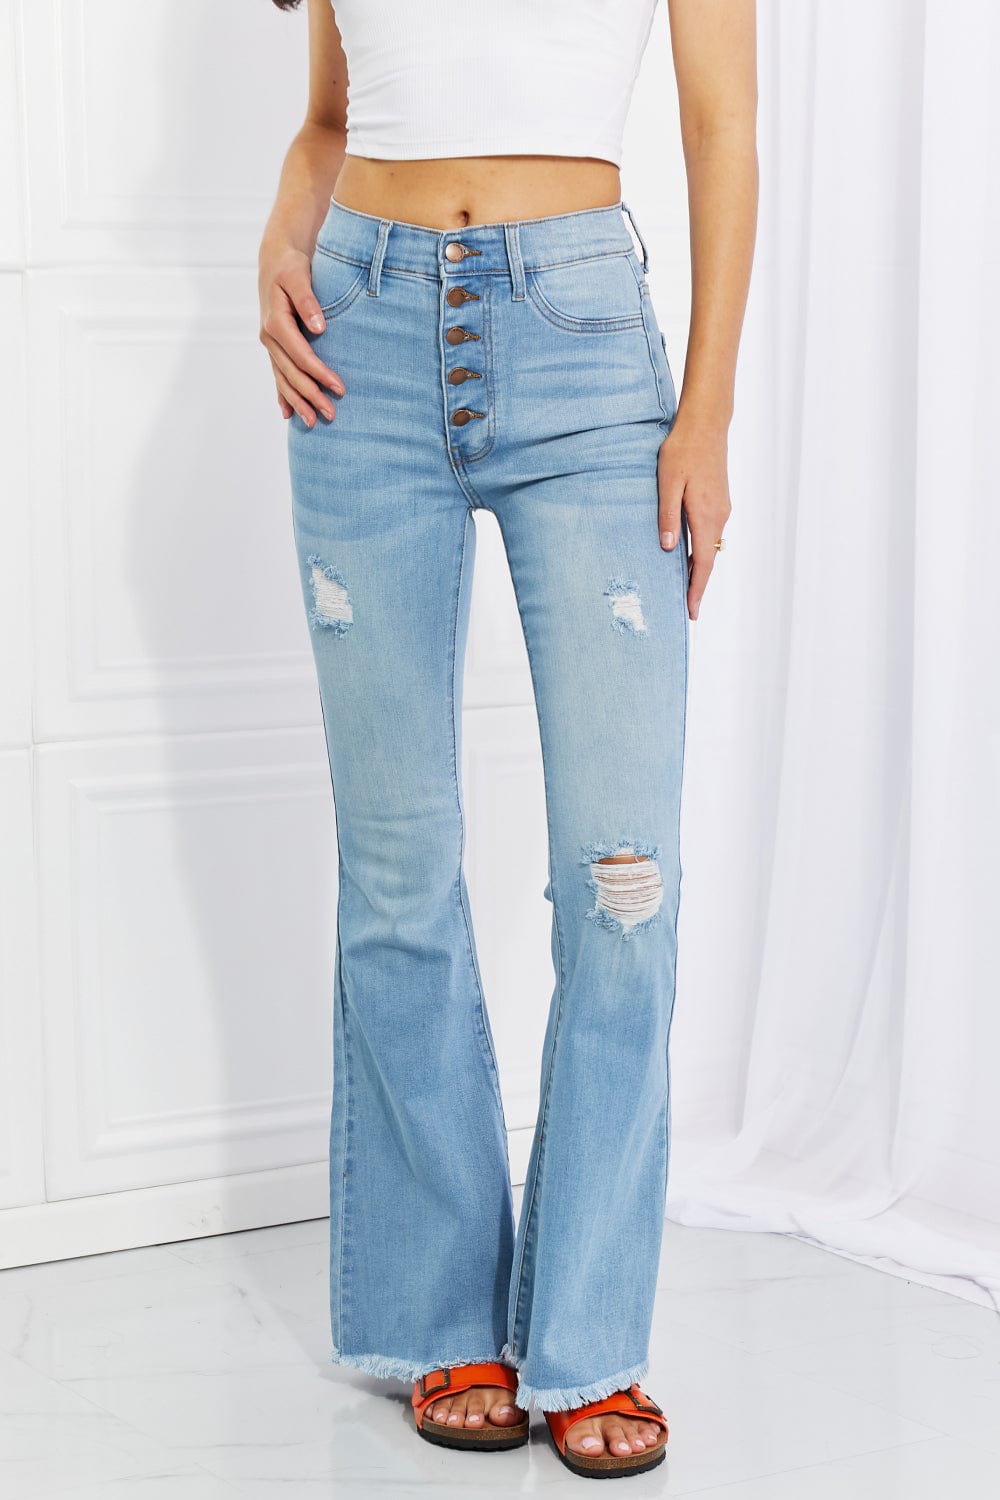 The802Gypsy Bottoms Light / 1(25) Gypsy Farah Button Flare Jeans